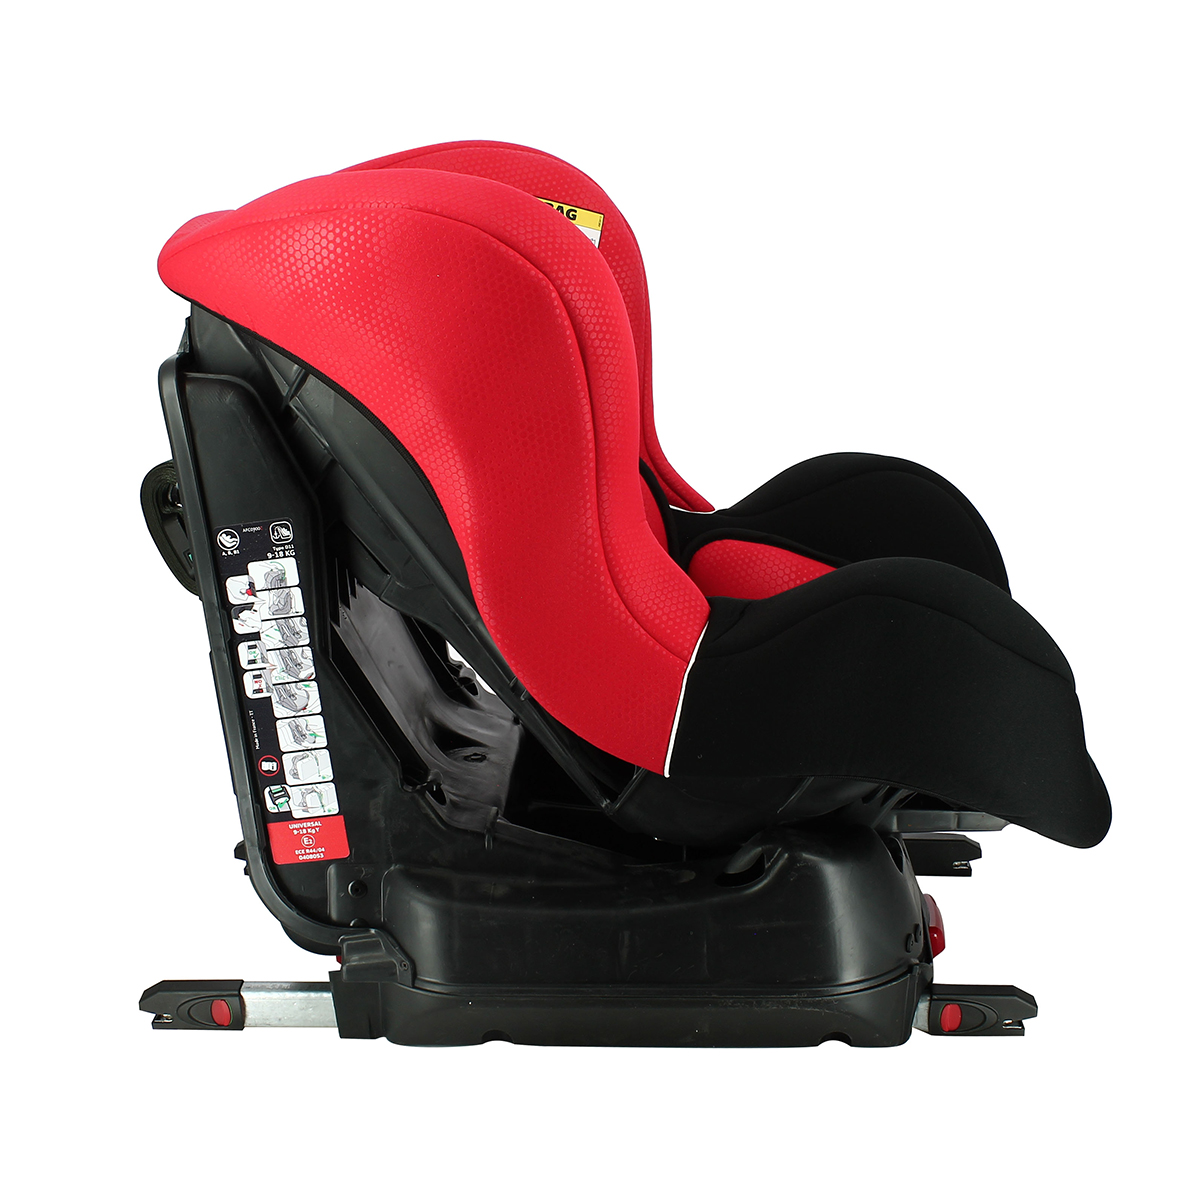 Siège auto cosmo 0-18 kg, Gamme luxe